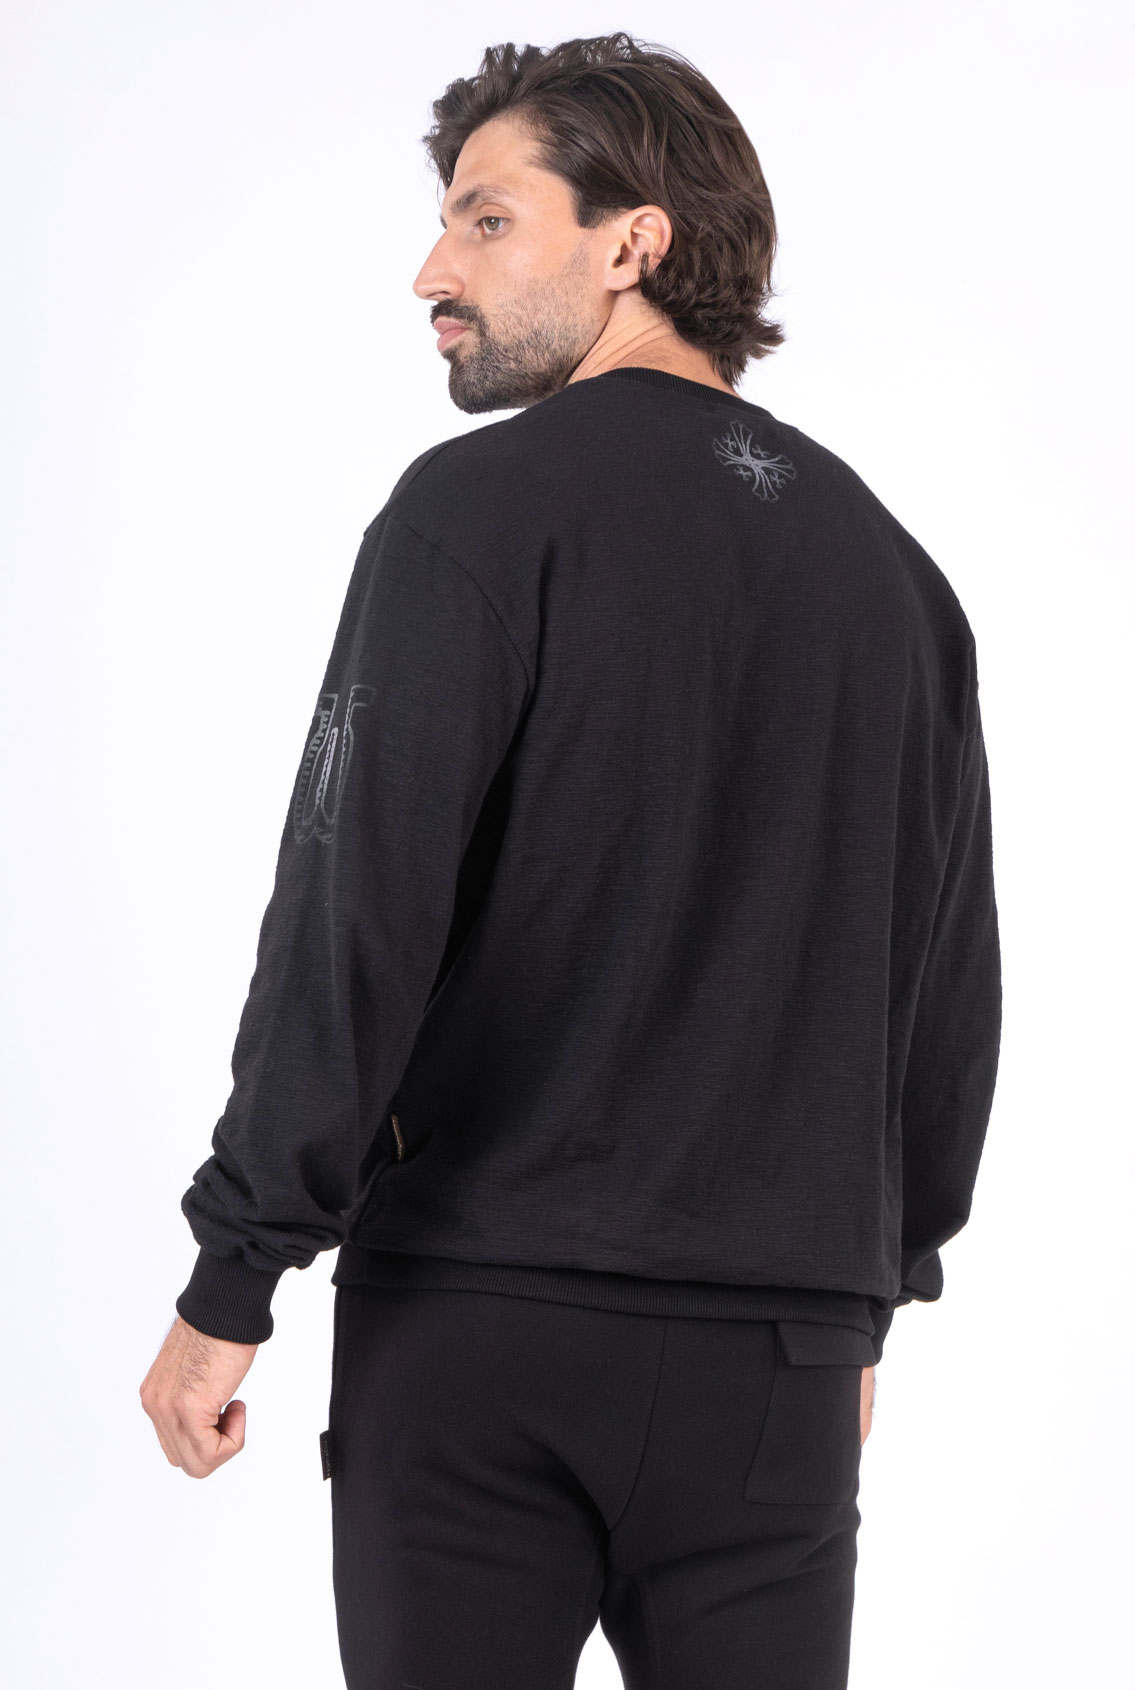 men's jumper with wings